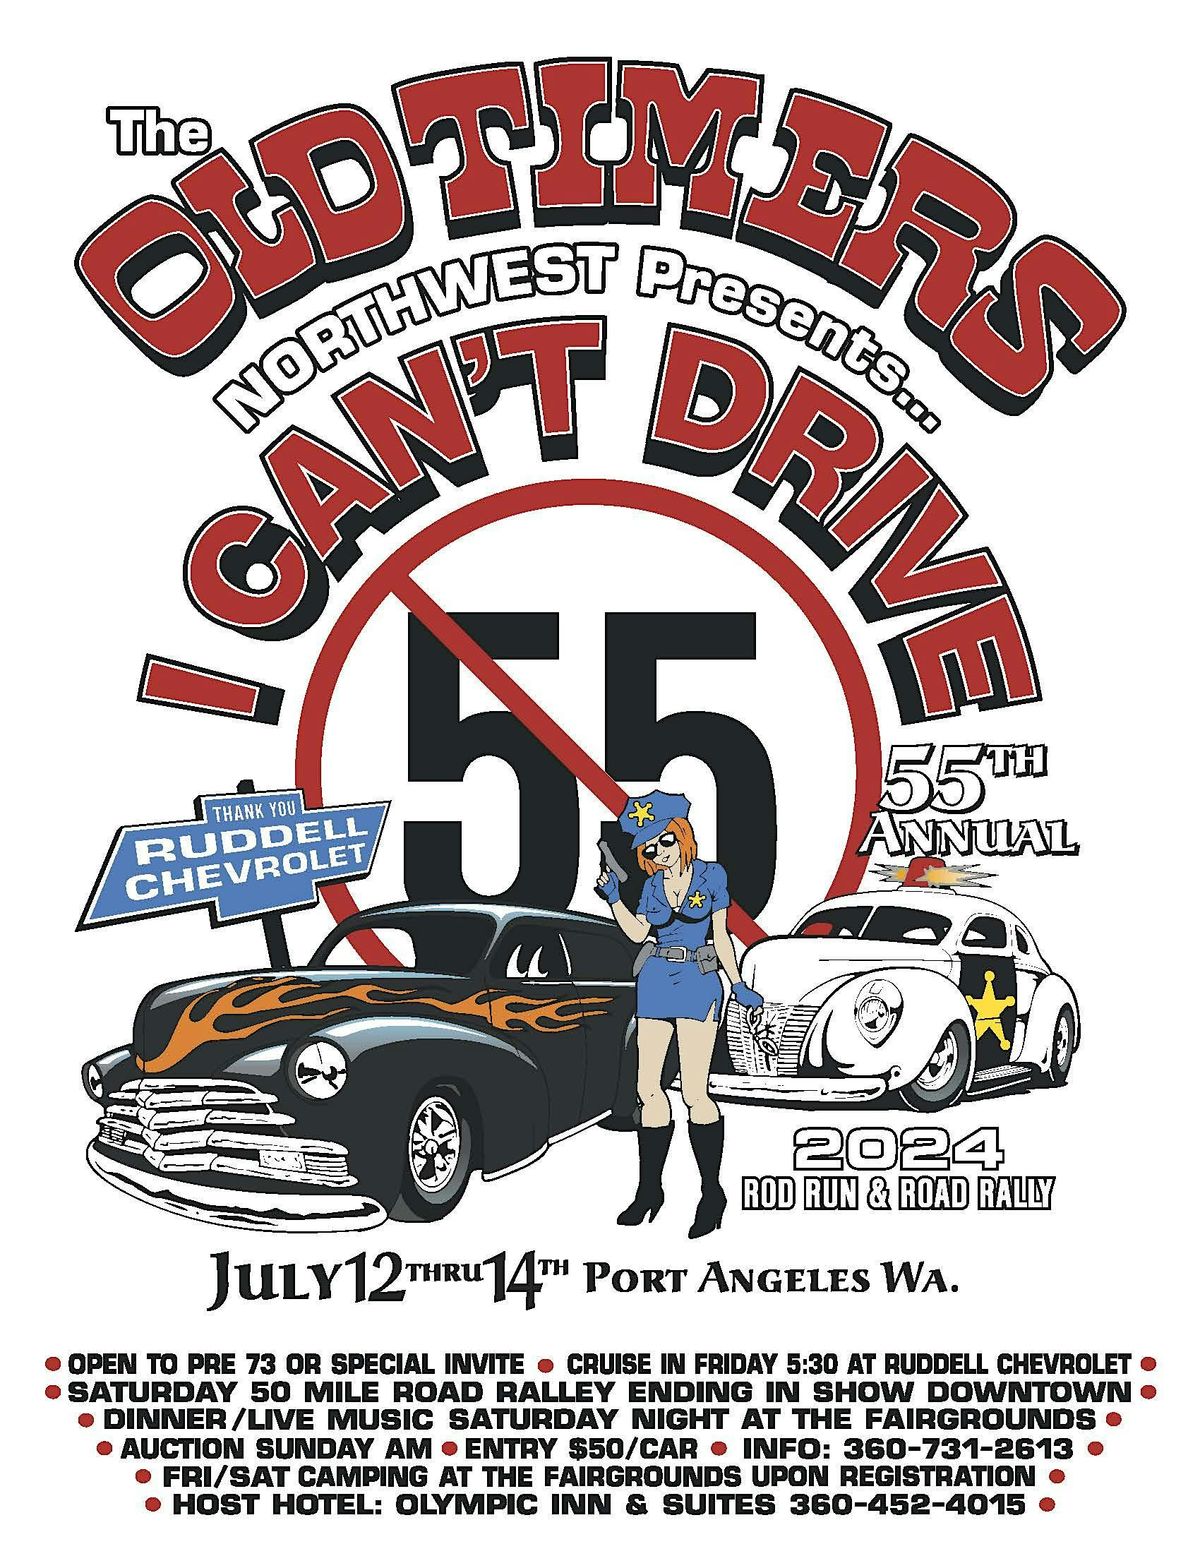 Oldtimers NW 55th Annual Rod Run & Road Rally